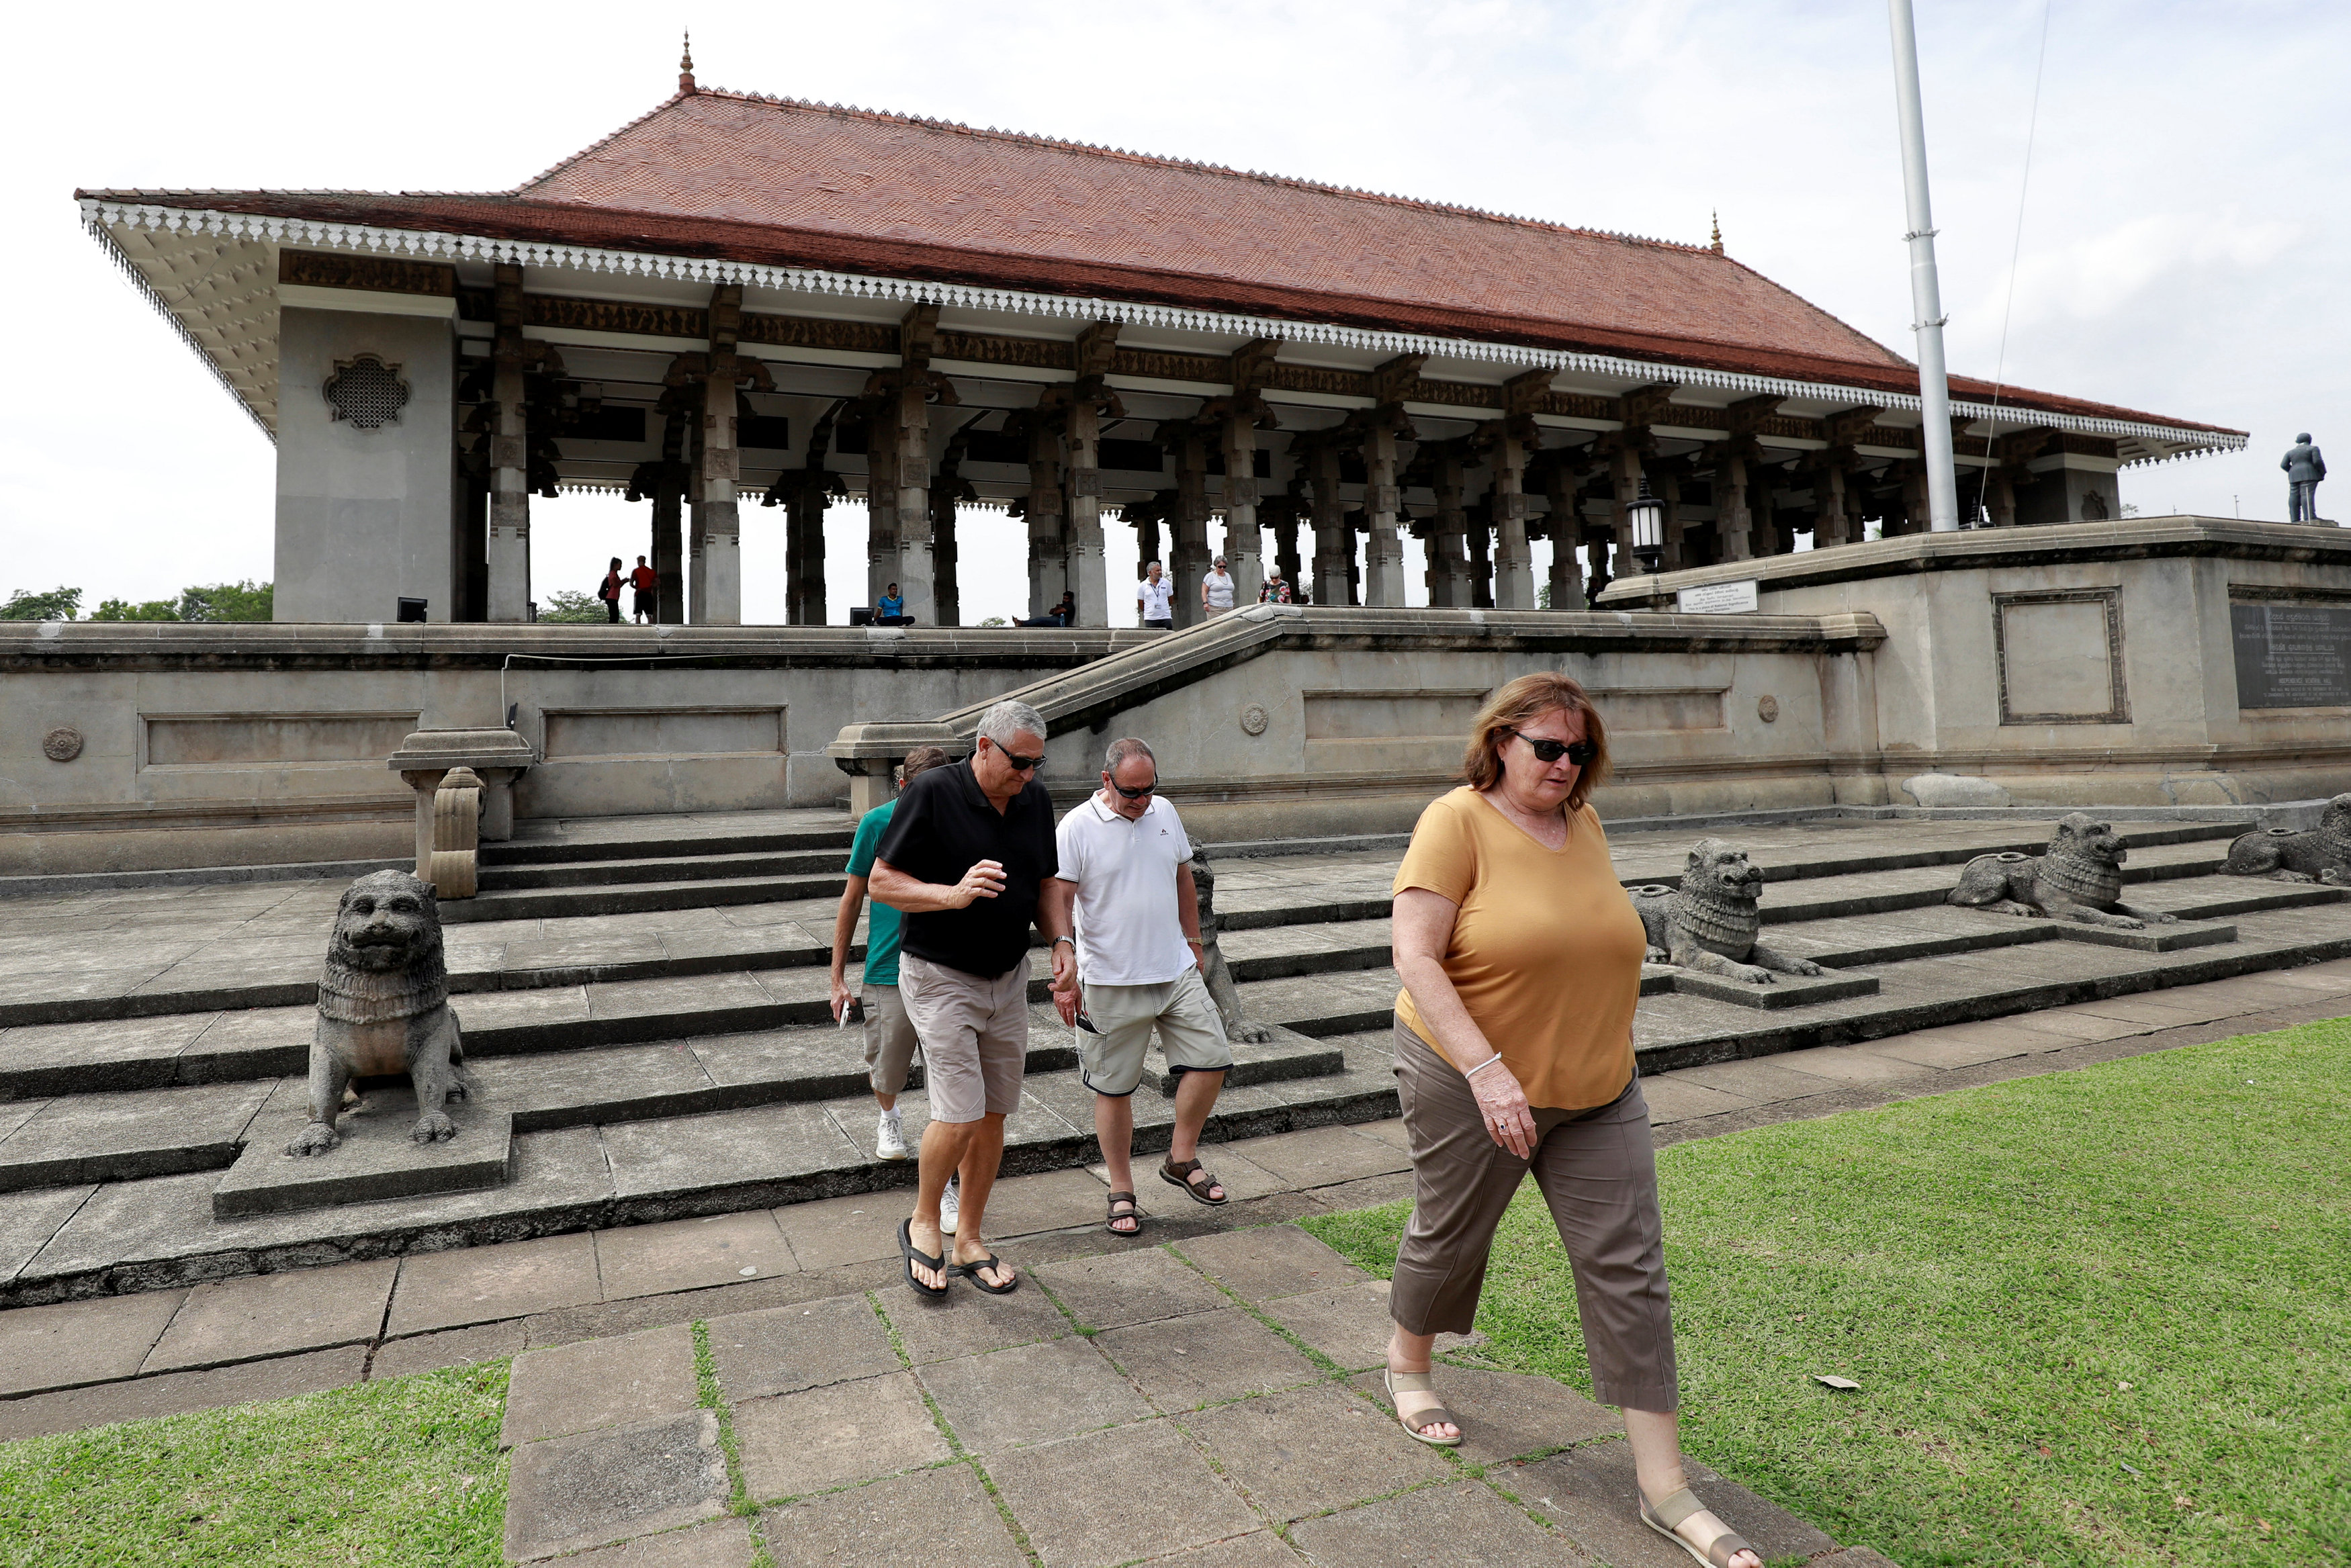 Tourists leave Independence Square after a visit in Colombo